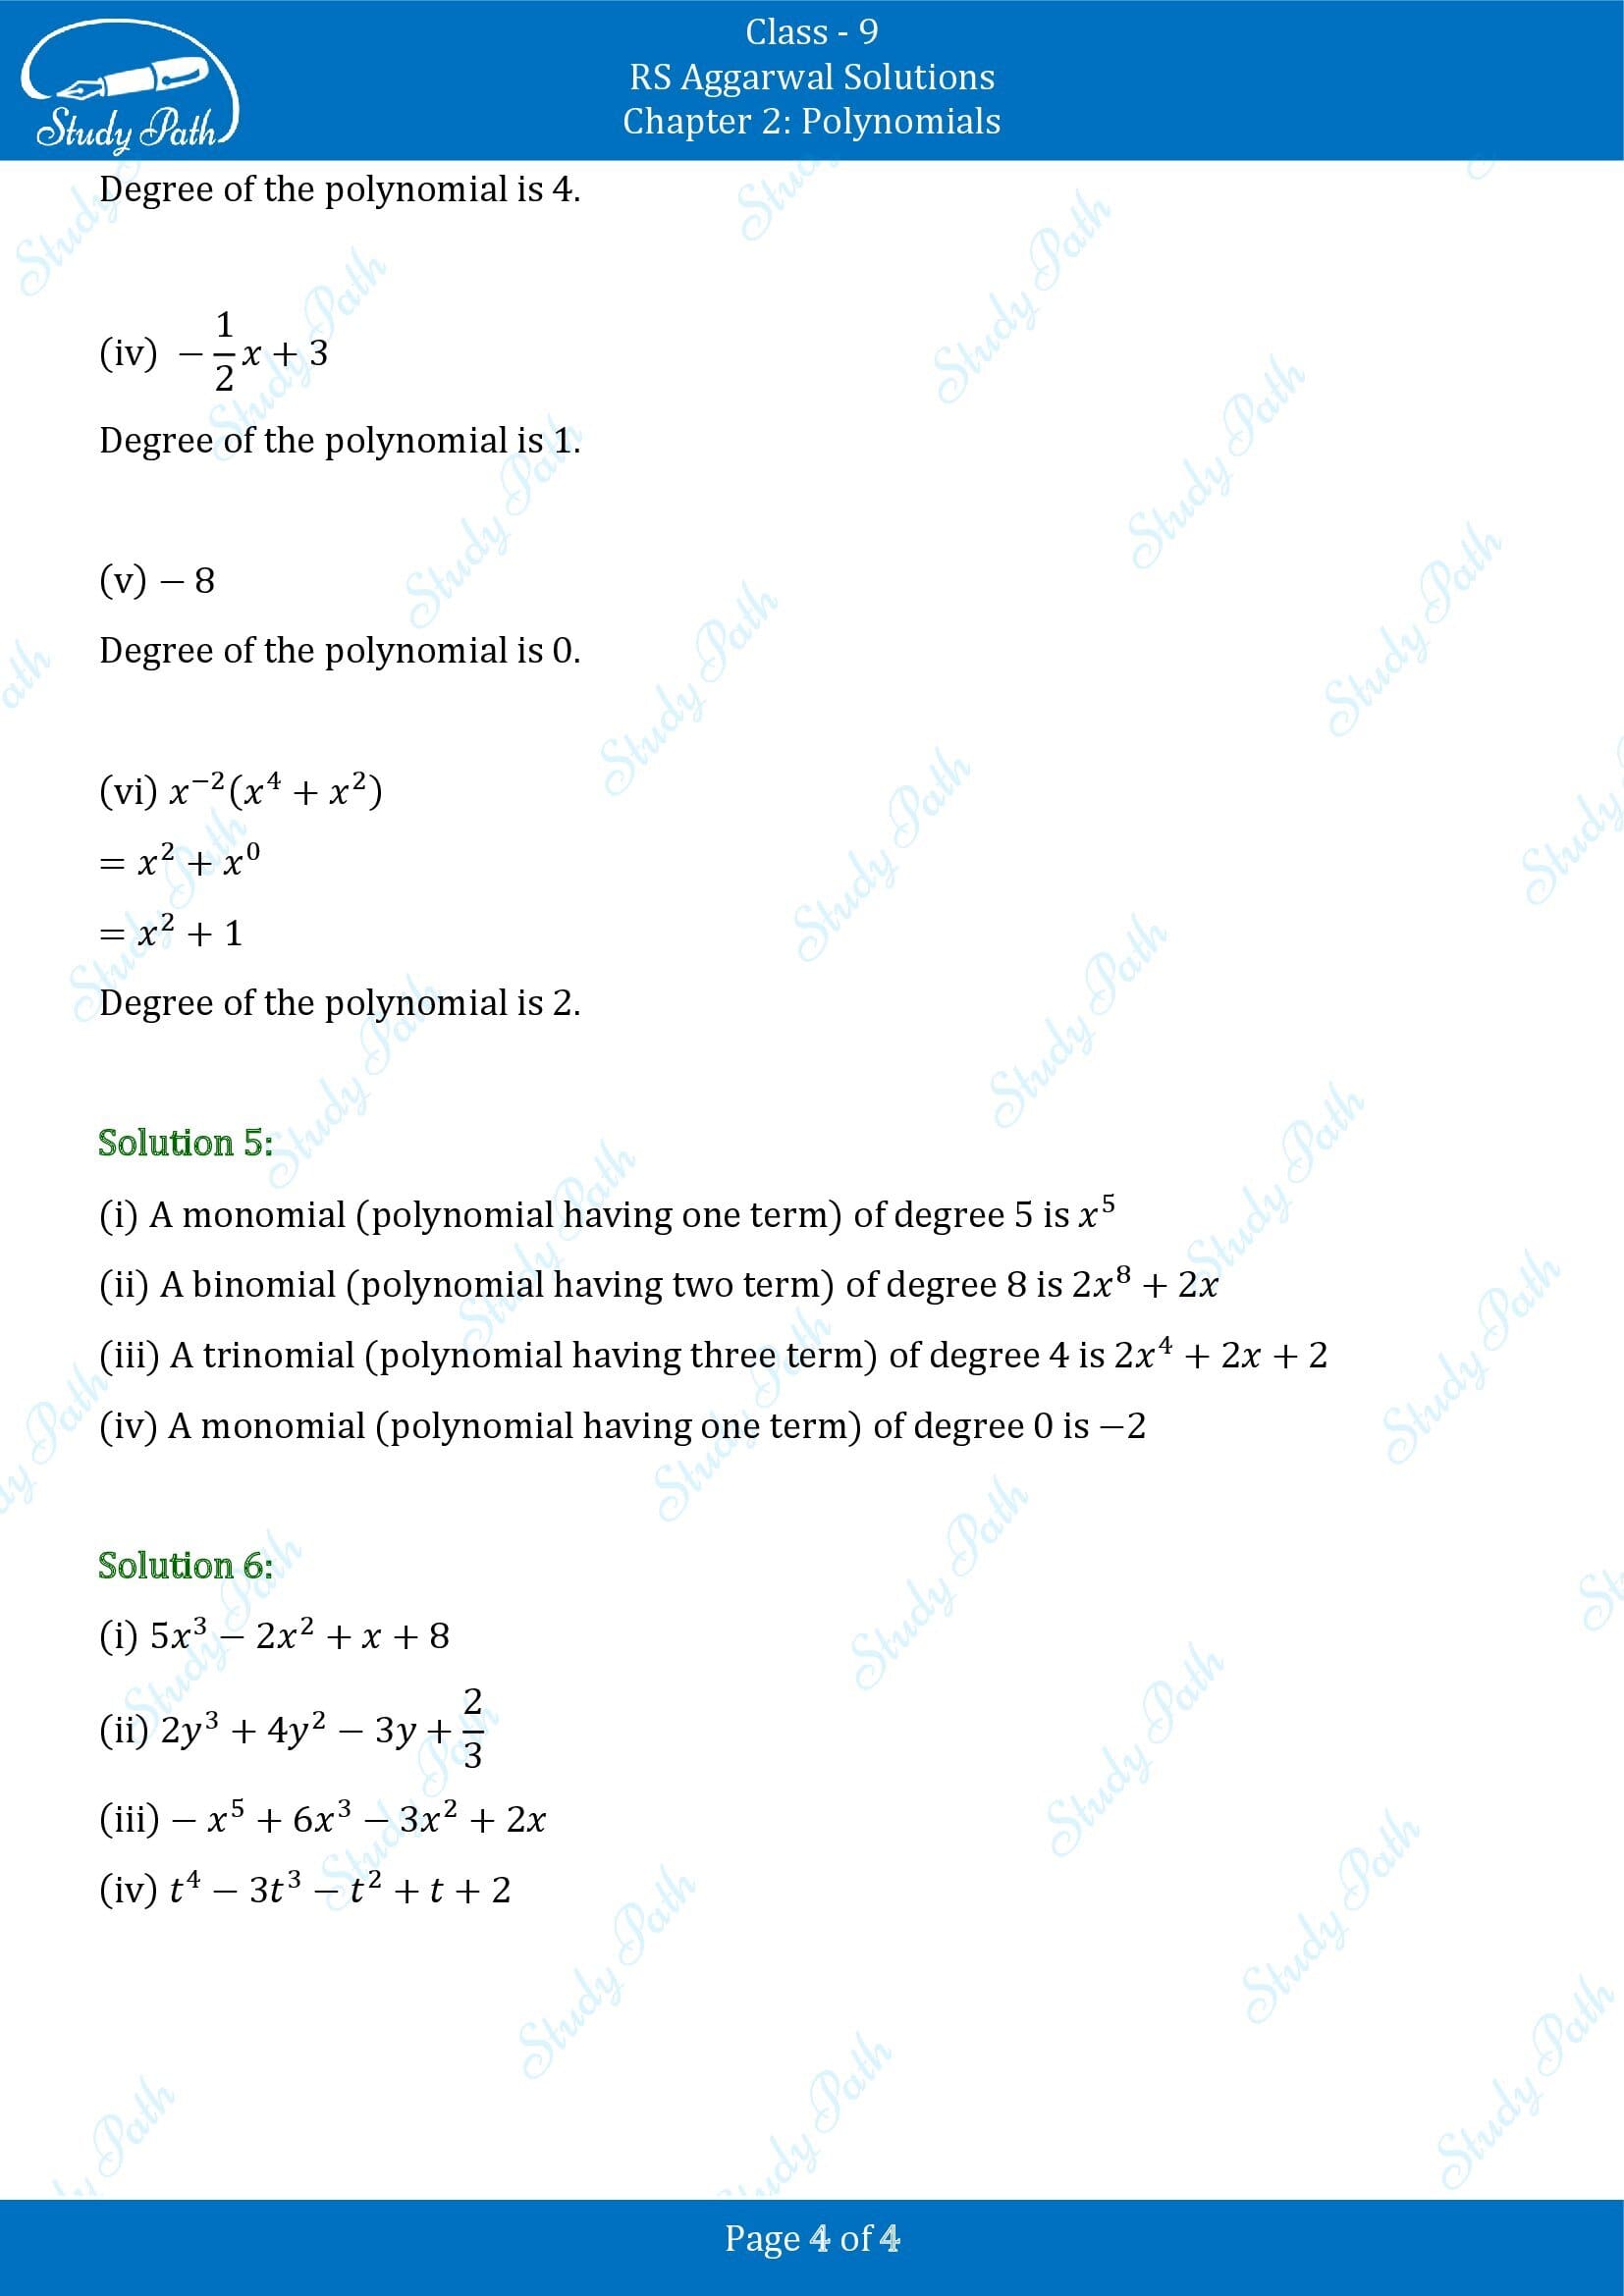 RS Aggarwal Solutions Class 9 Chapter 2 Polynomials Exercise 2A 004